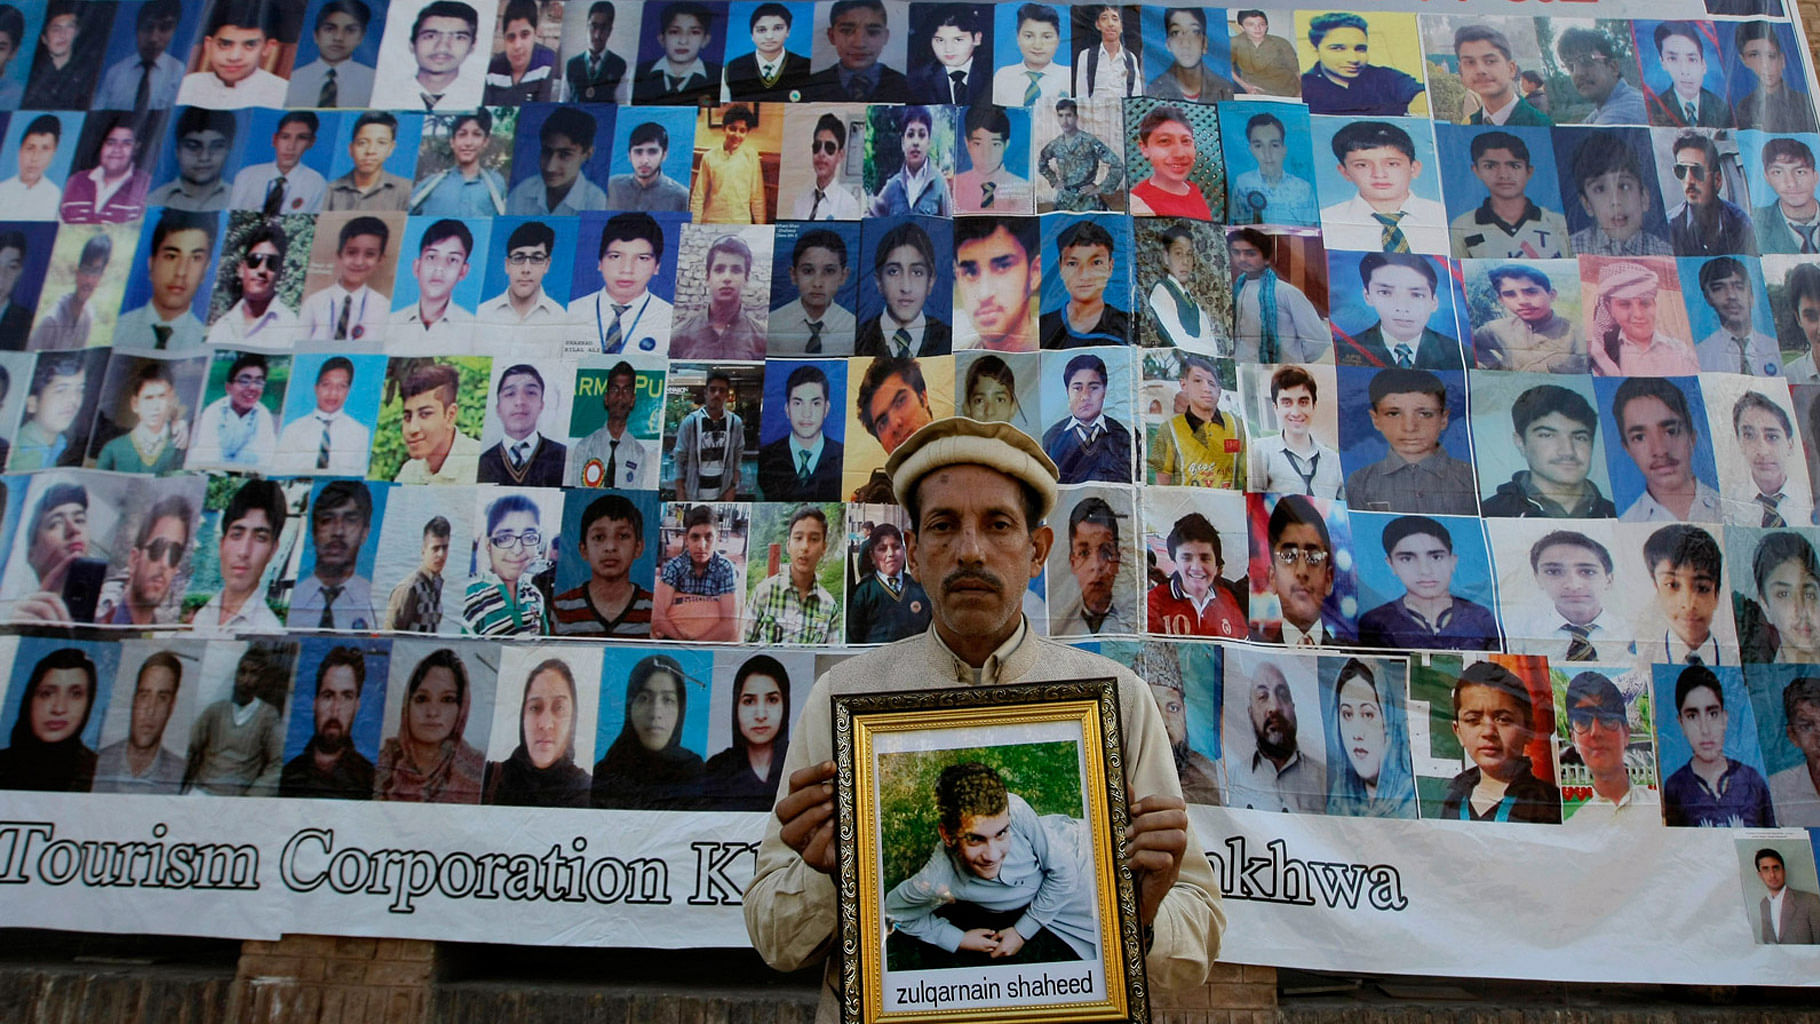 A Pakistani father holds a picture of his son who was killed in an attack, in front of photographs of other victims, ahead of the first anniversary of the Peshawar school attack on 15 December. (Photo: AP)